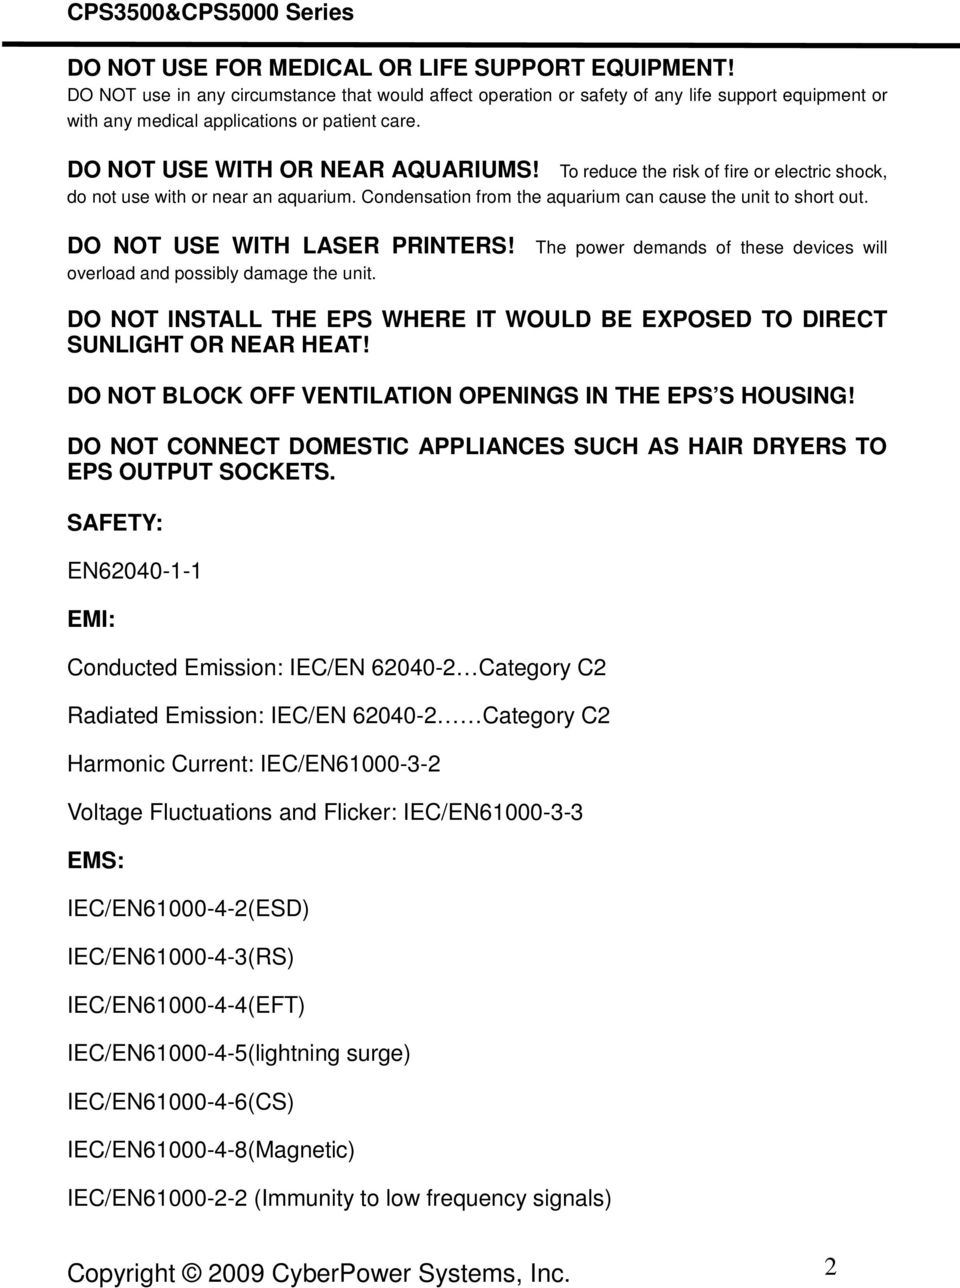 DO NOT USE WITH LASER PRINTERS! The power demands of these devices will overload and possibly damage the unit. DO NOT INSTALL THE EPS WHERE IT WOULD BE EXPOSED TO DIRECT SUNLIGHT OR NEAR HEAT!